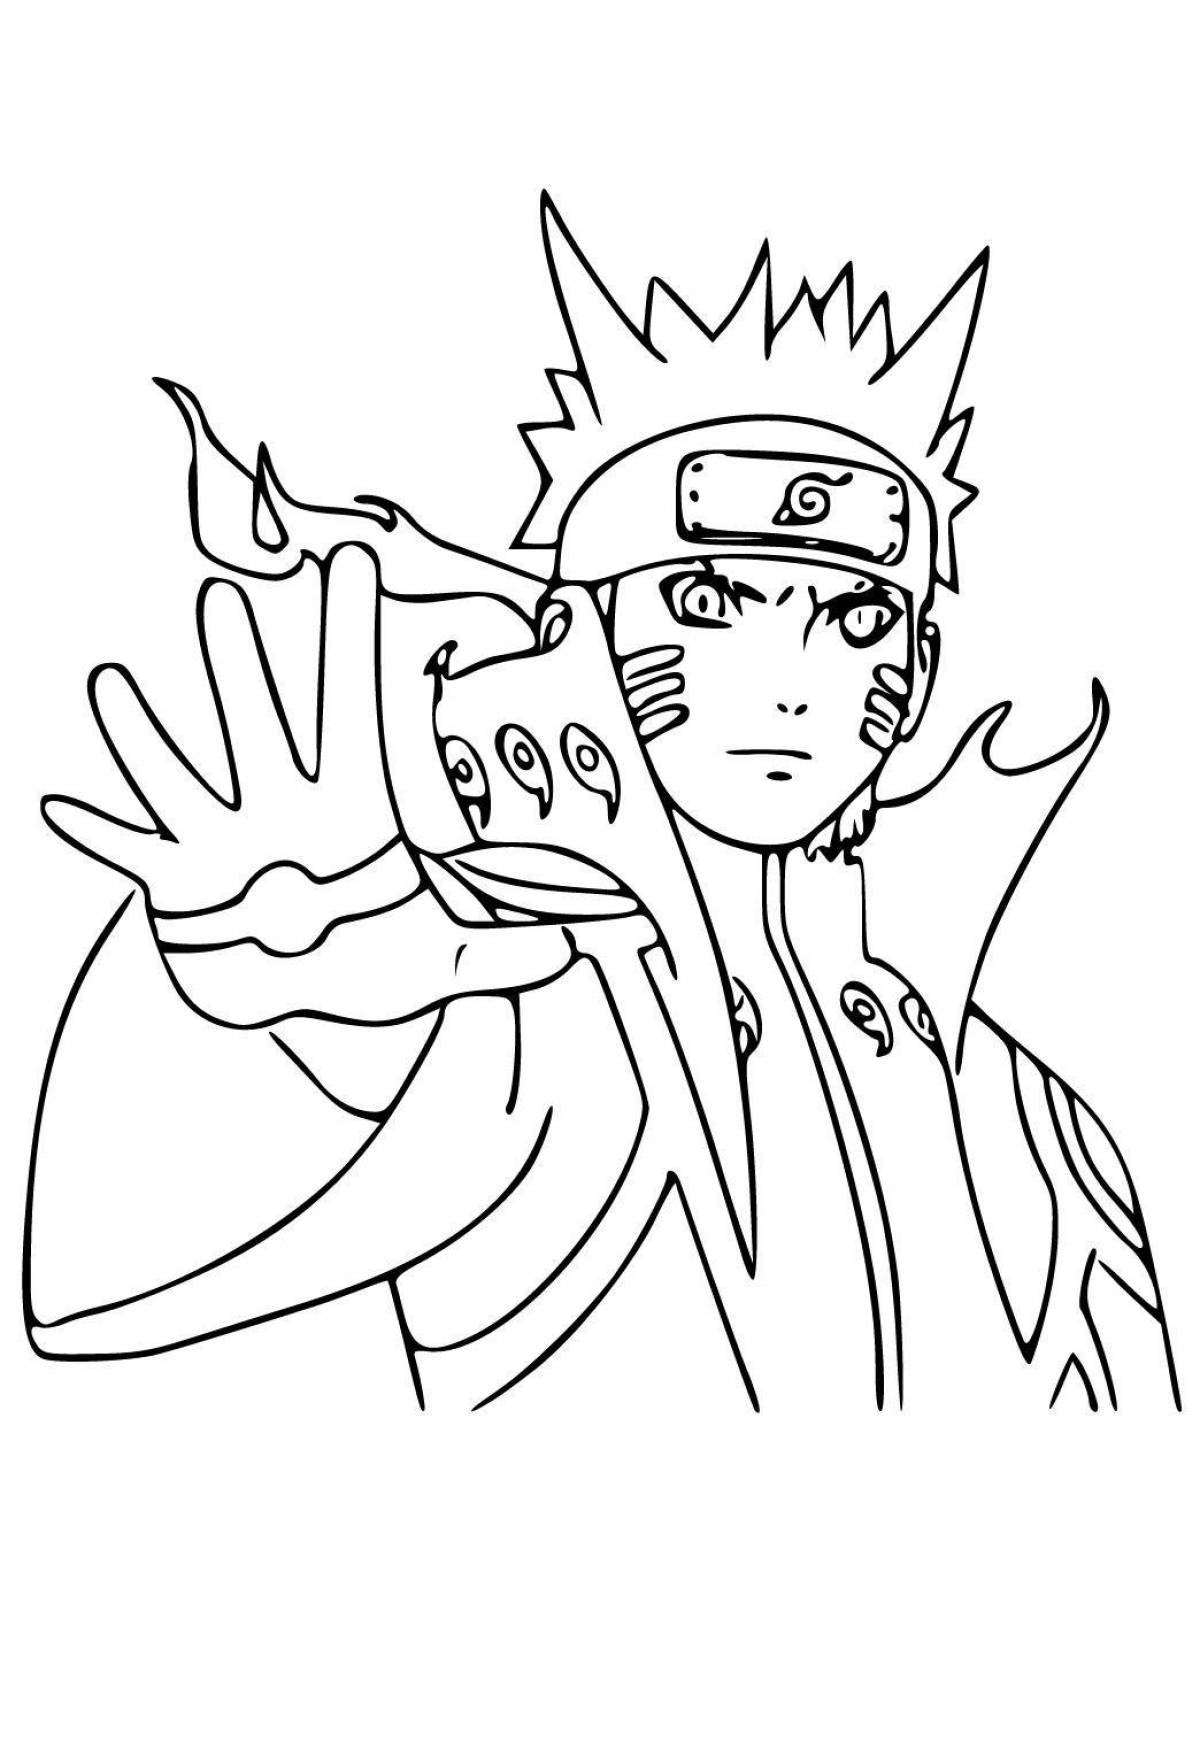 Exquisite naruto coloring in hermit mode